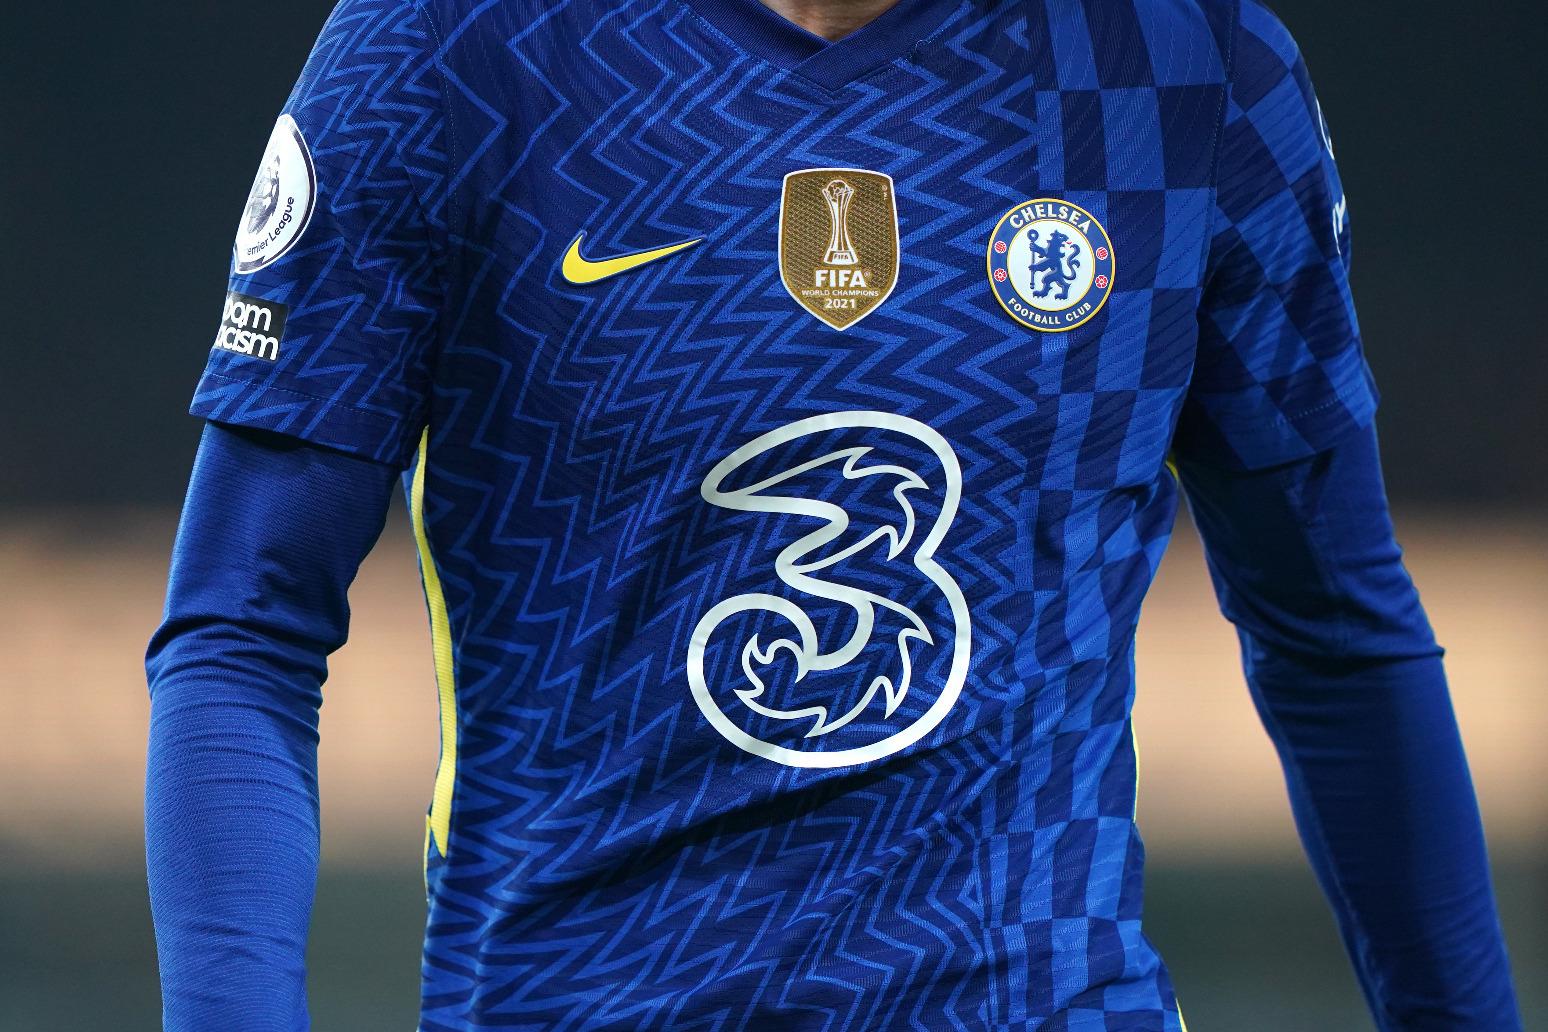 Three have confirmed suspension of sponsorship of Chelsea 